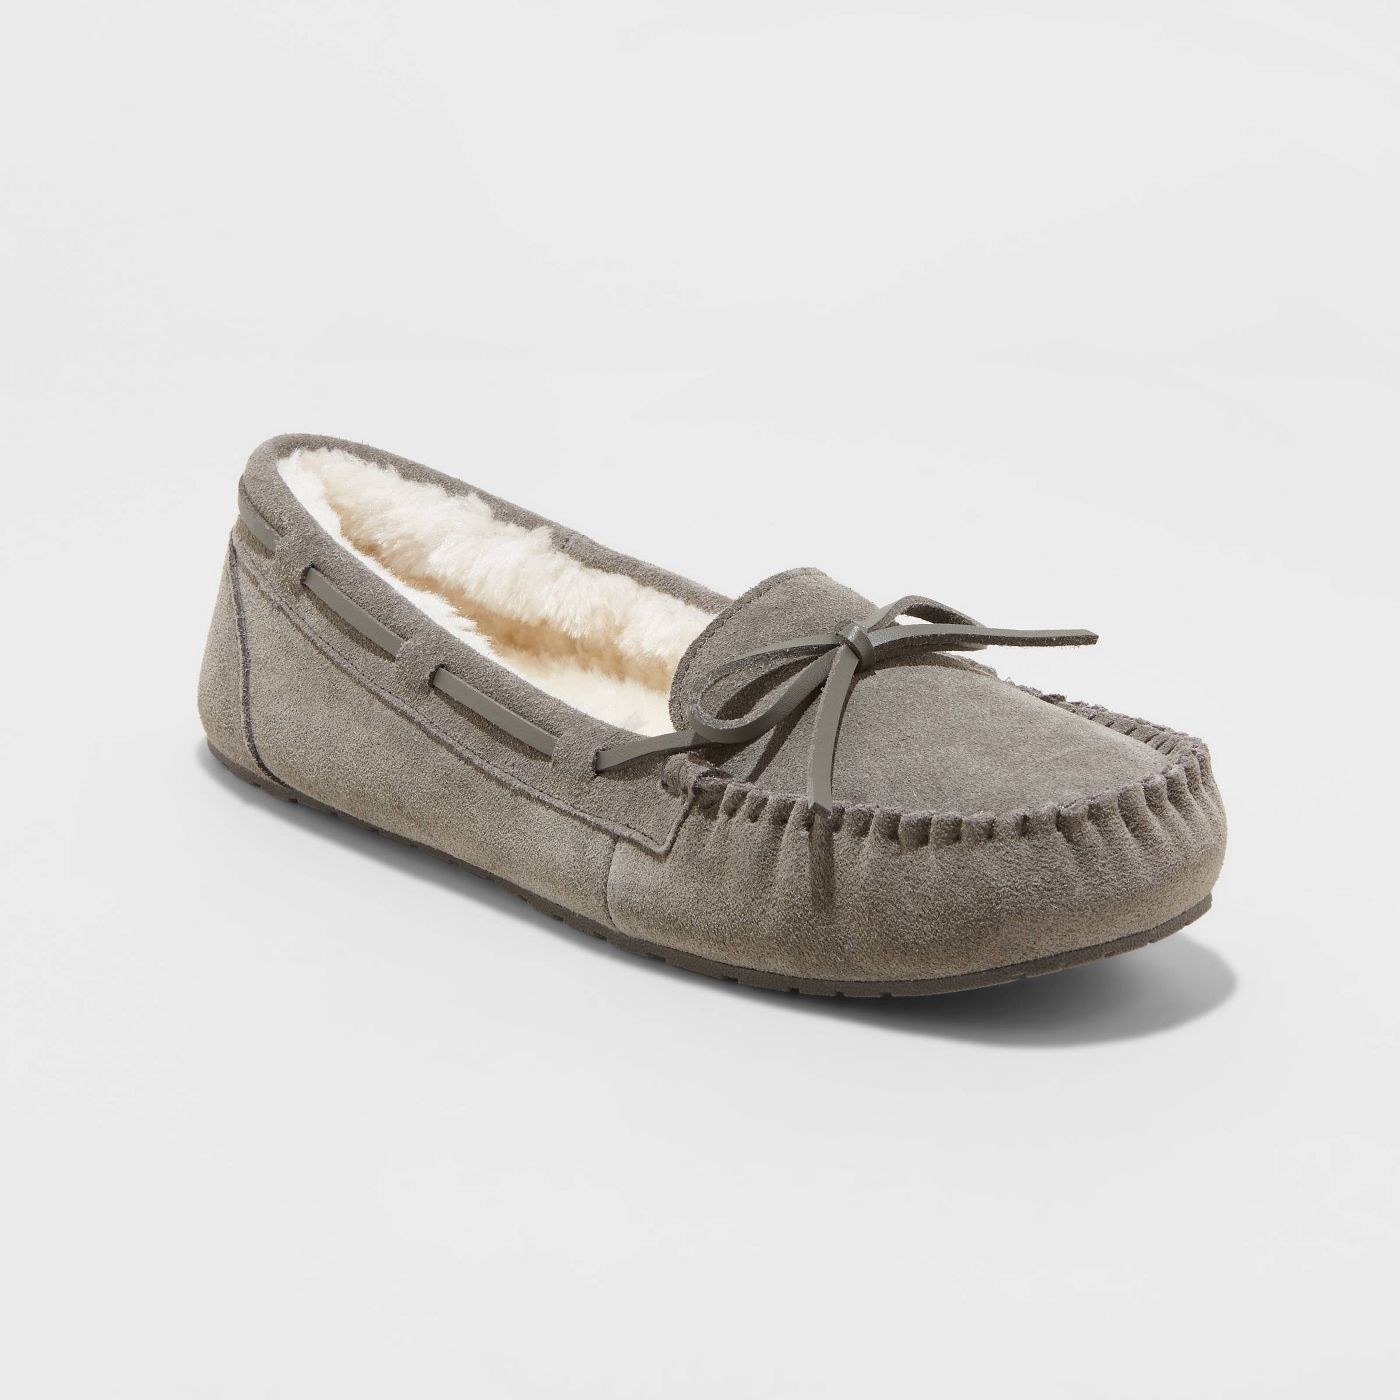 gray suede moccasin slipper with sherpa lining